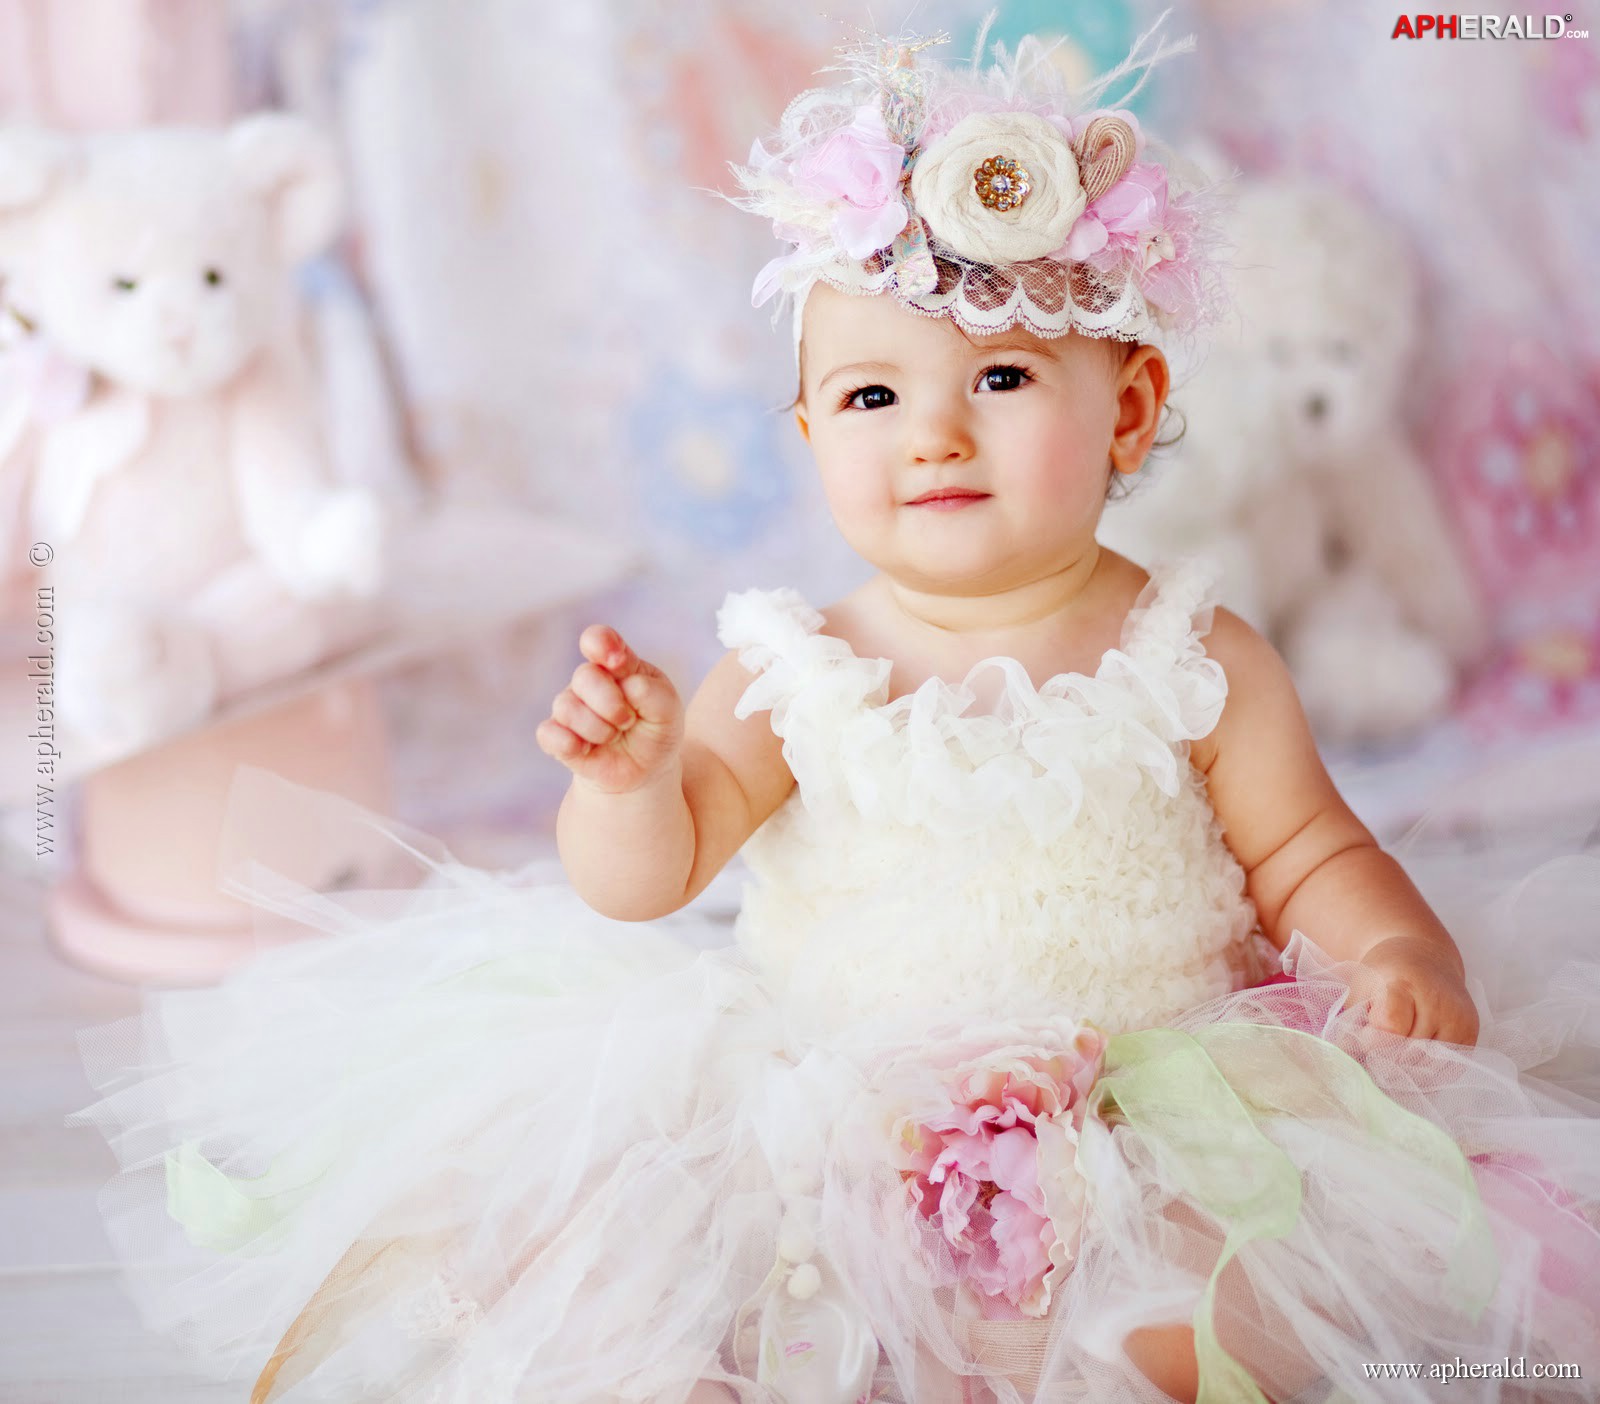  49 Cute  Baby  Girl  Pictures Wallpapers  on WallpaperSafari